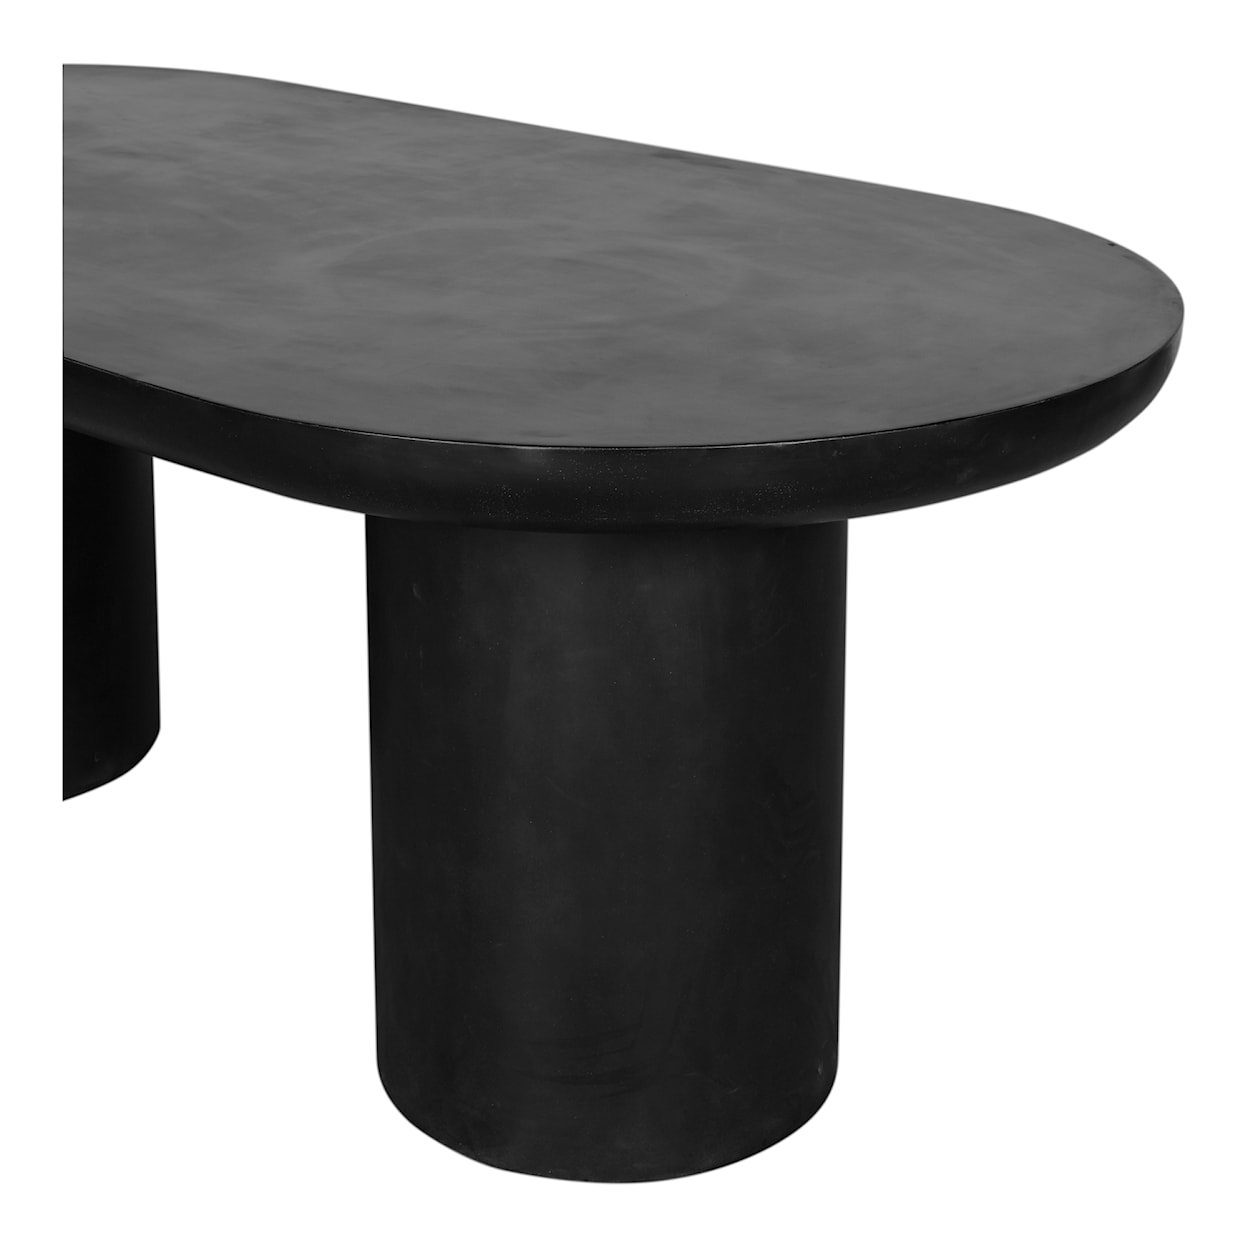 Moe's Home Collection Rocca Rocca Dining Table